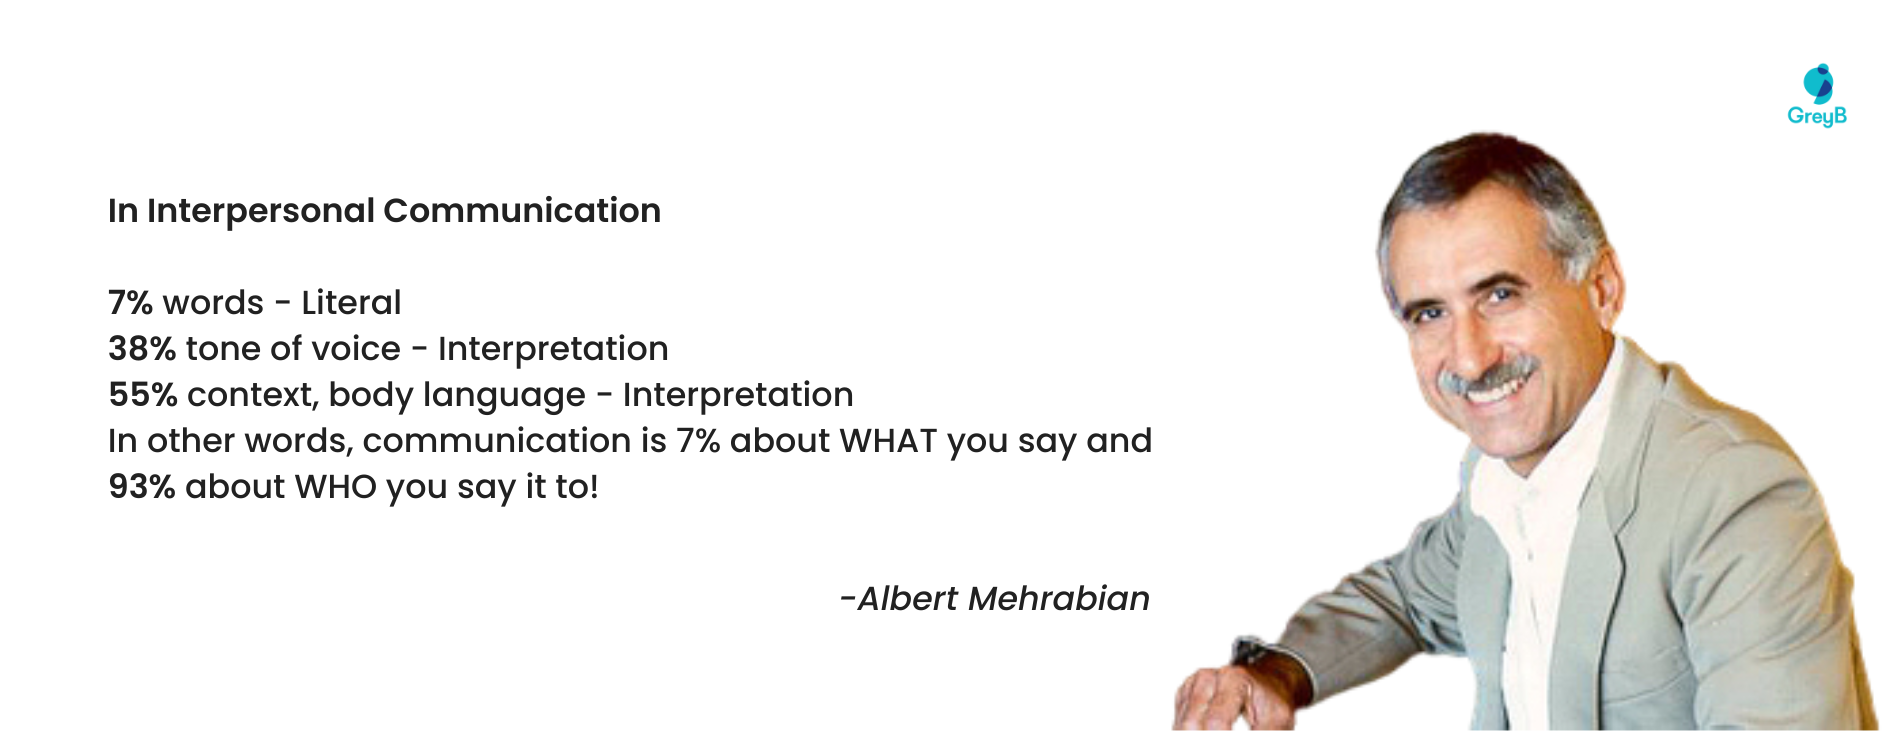 Communication model by Albert Mehrabian for a mentor-mentee relationship